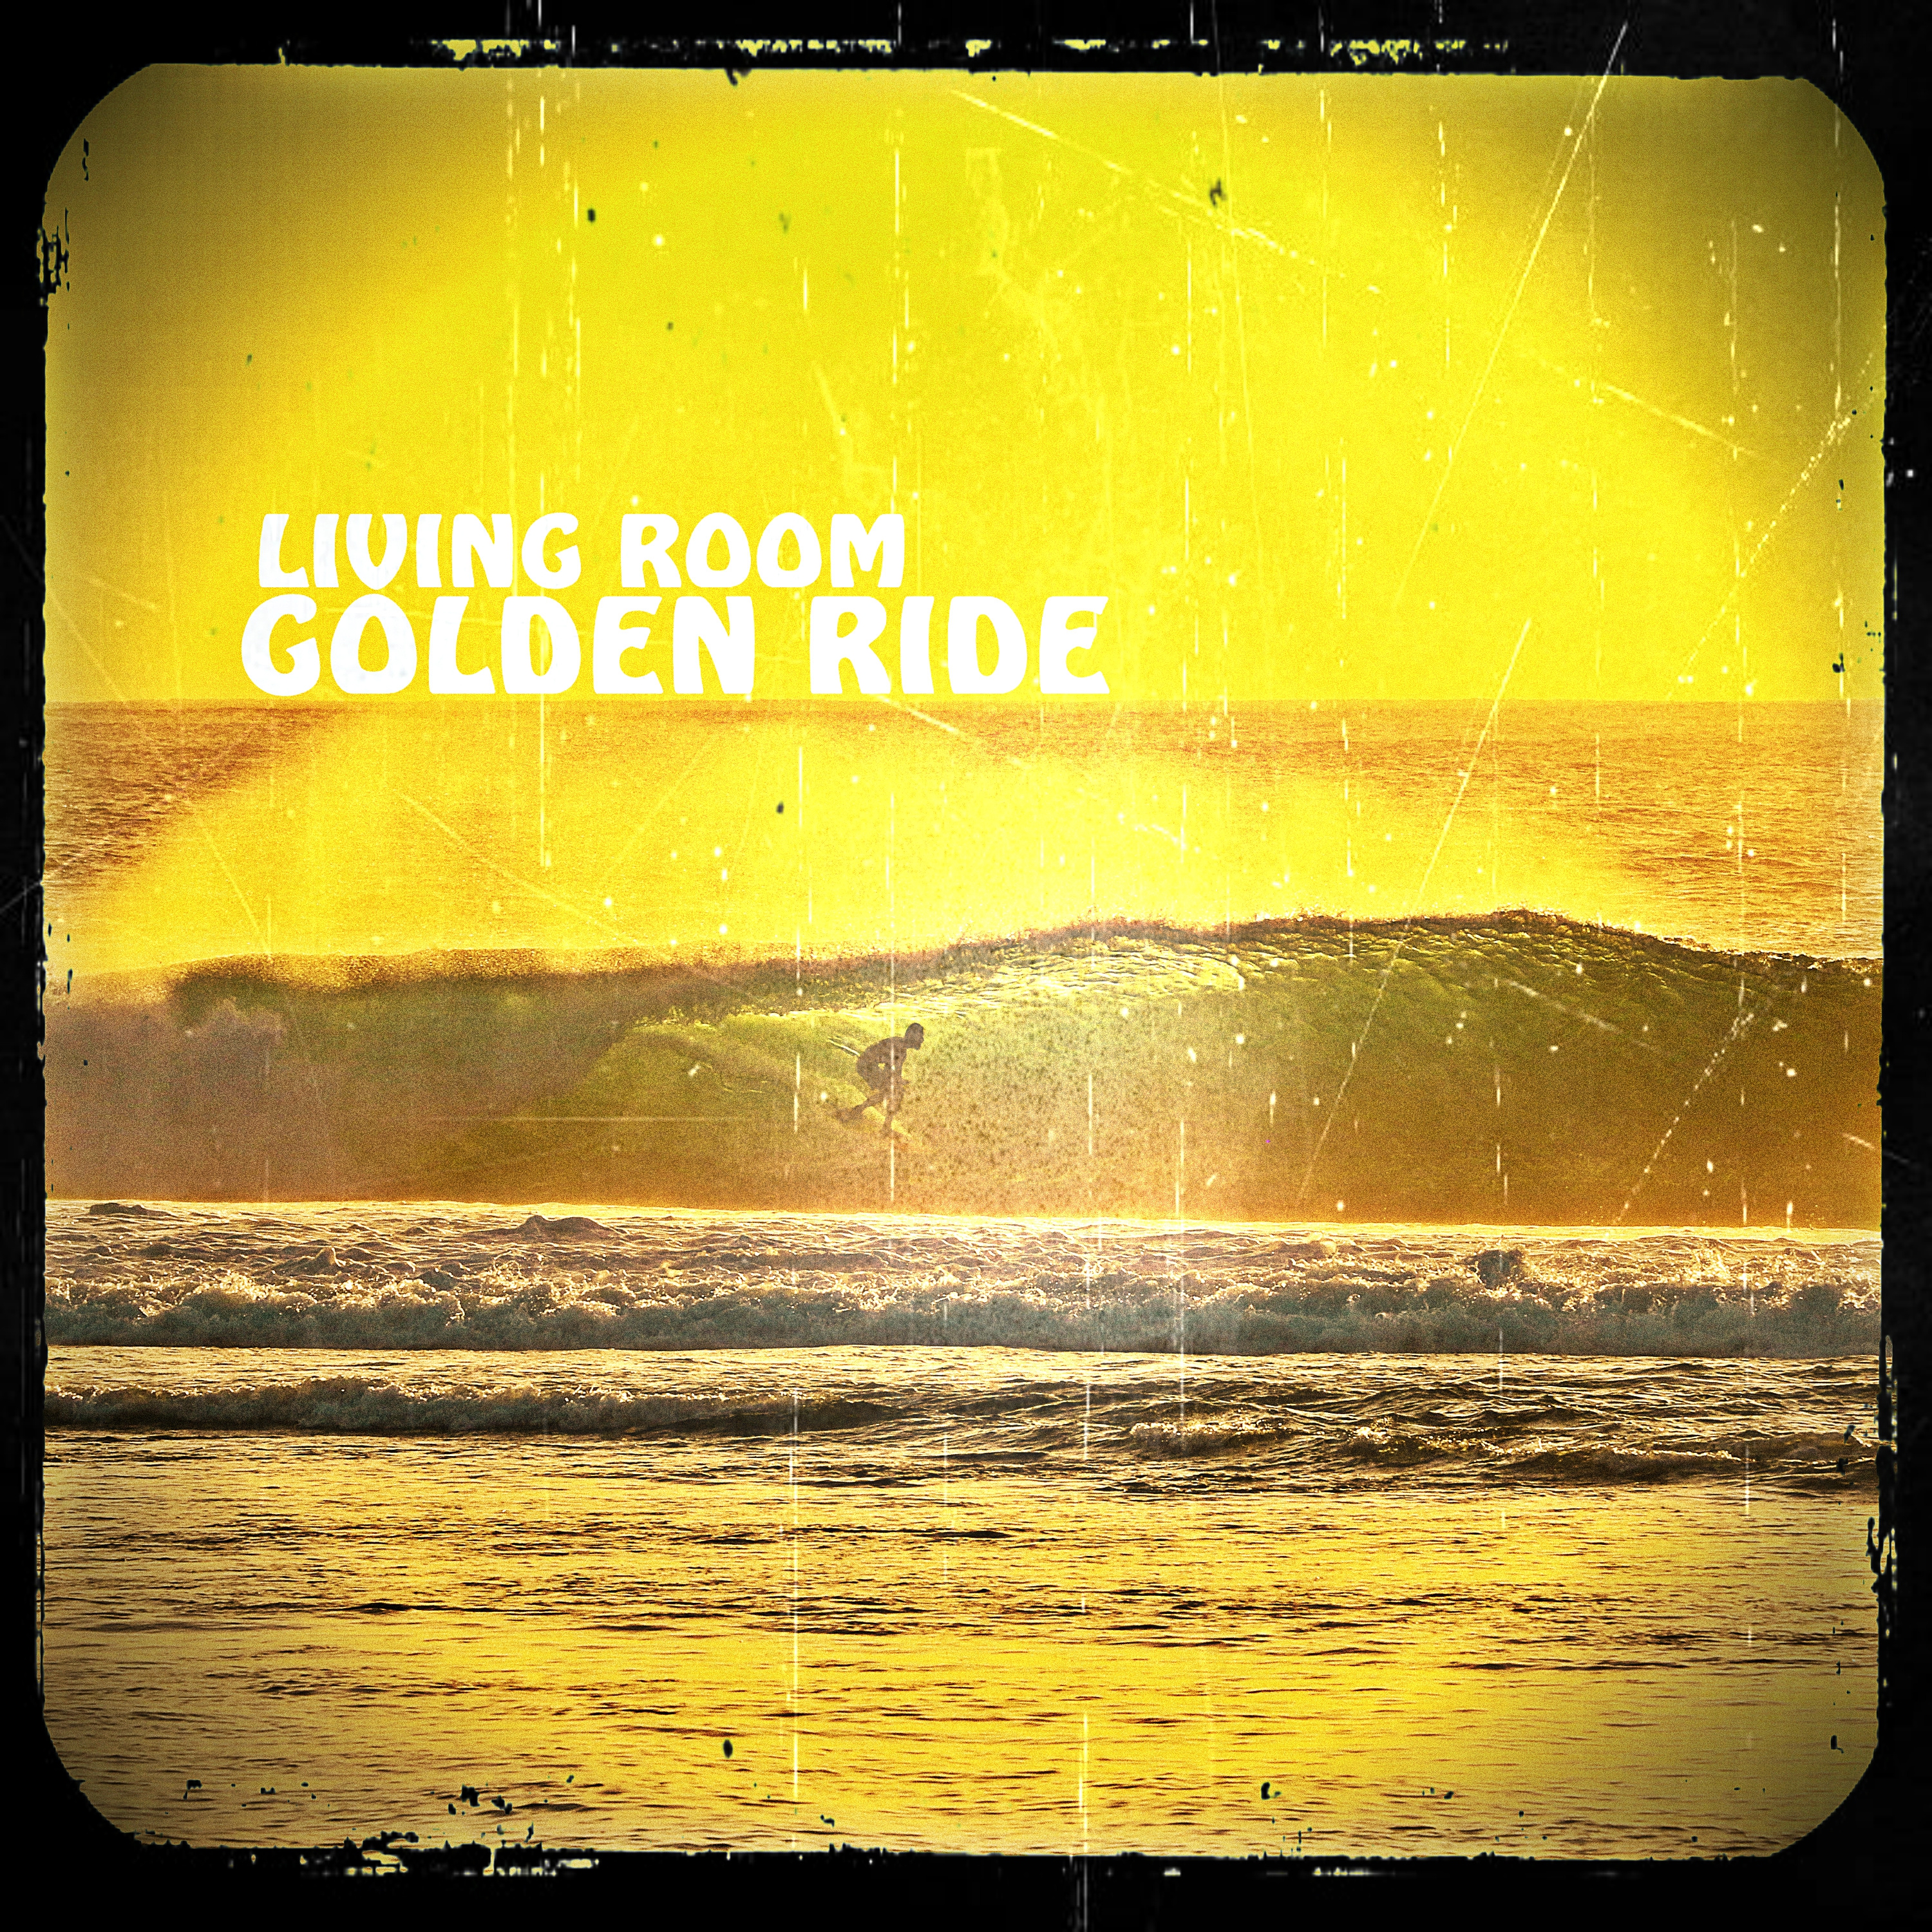 Golden Ride (Pearldiver Homegrown Mix)